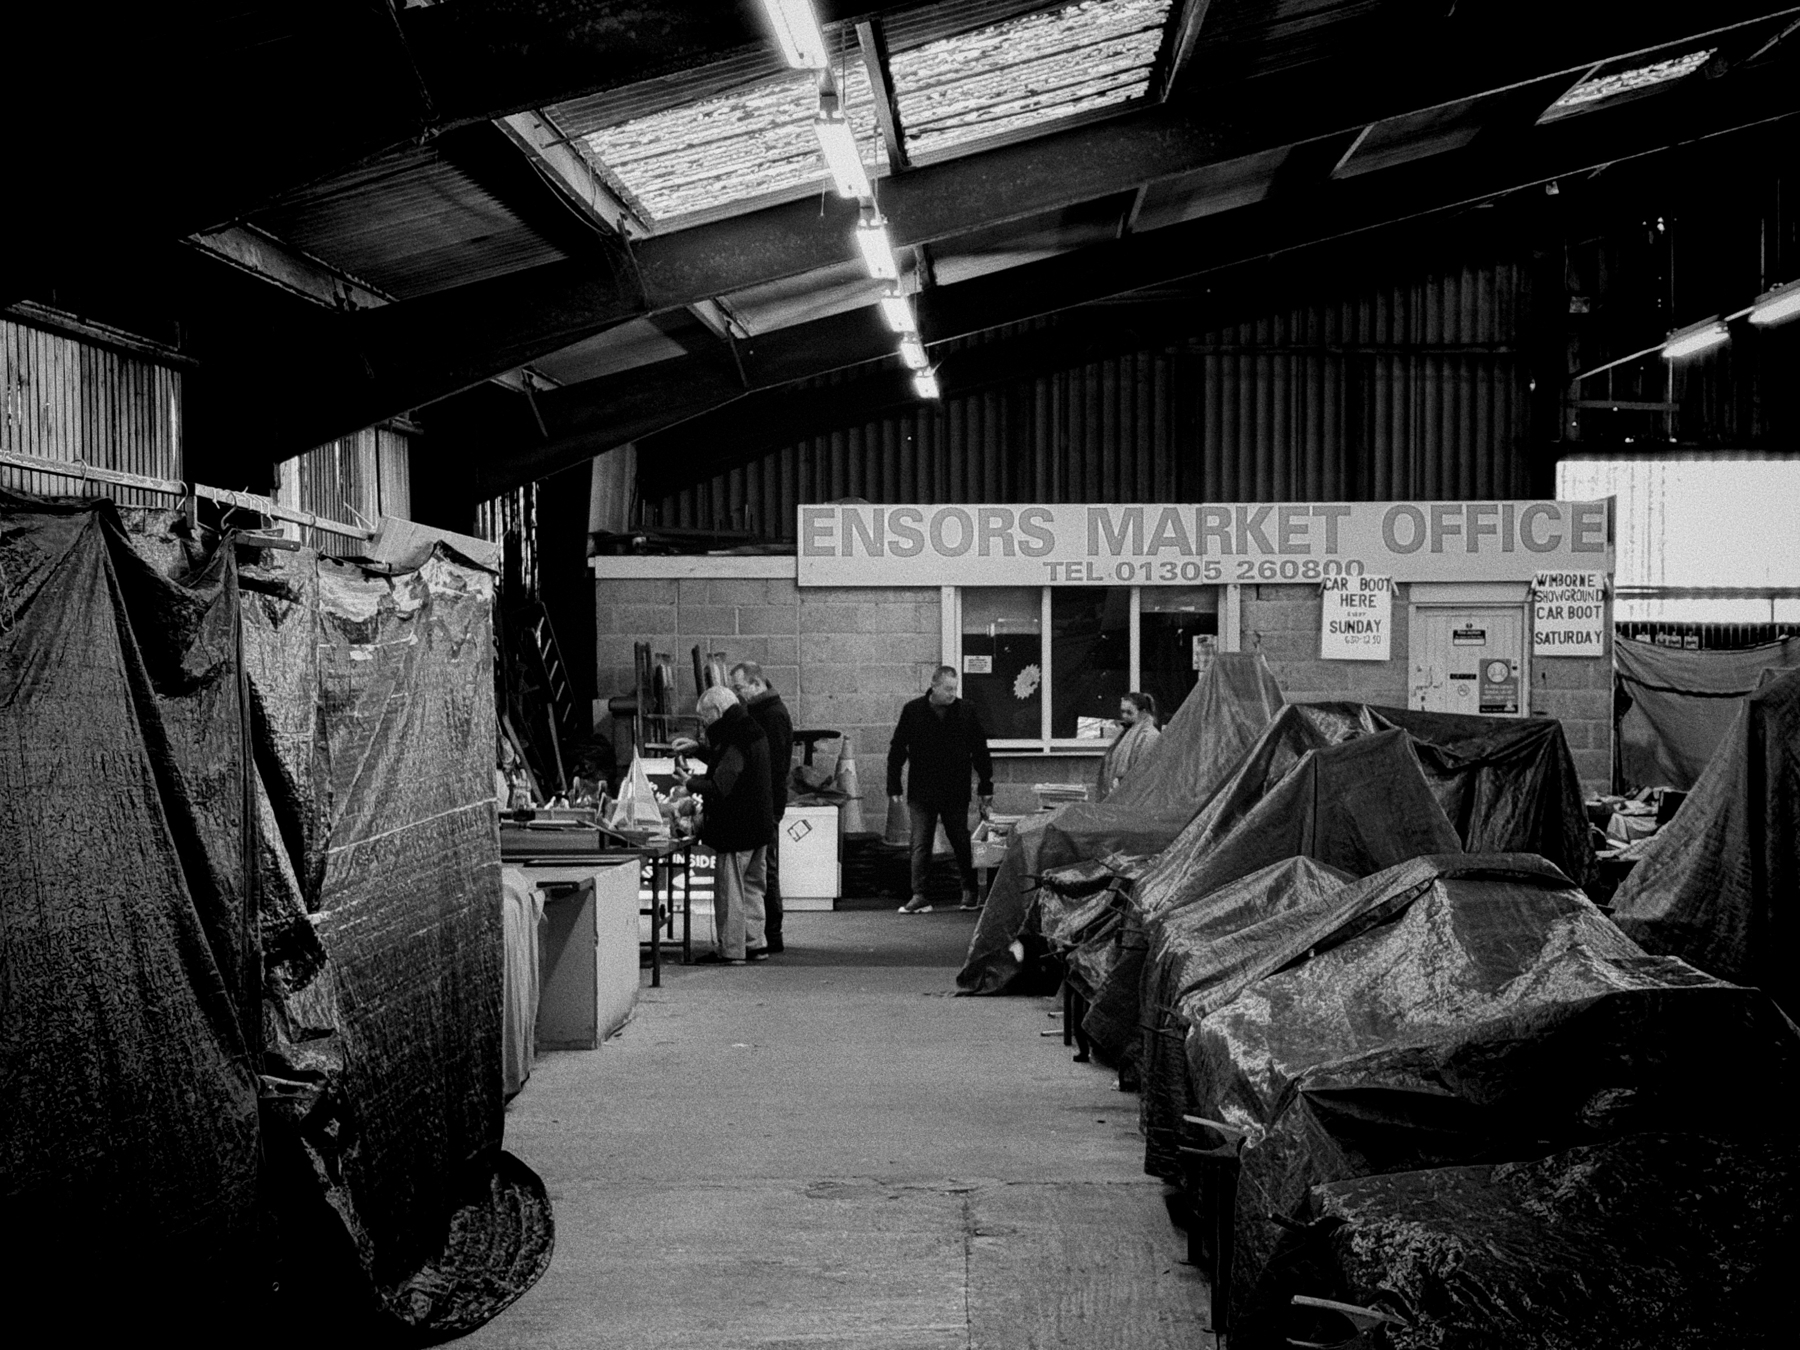 Black and white photo of an indoor market setting with covered stalls, a few individuals visible, and a sign reading &ldquo;ENSORS MARKET OFFICE&rdquo; with a telephone number.